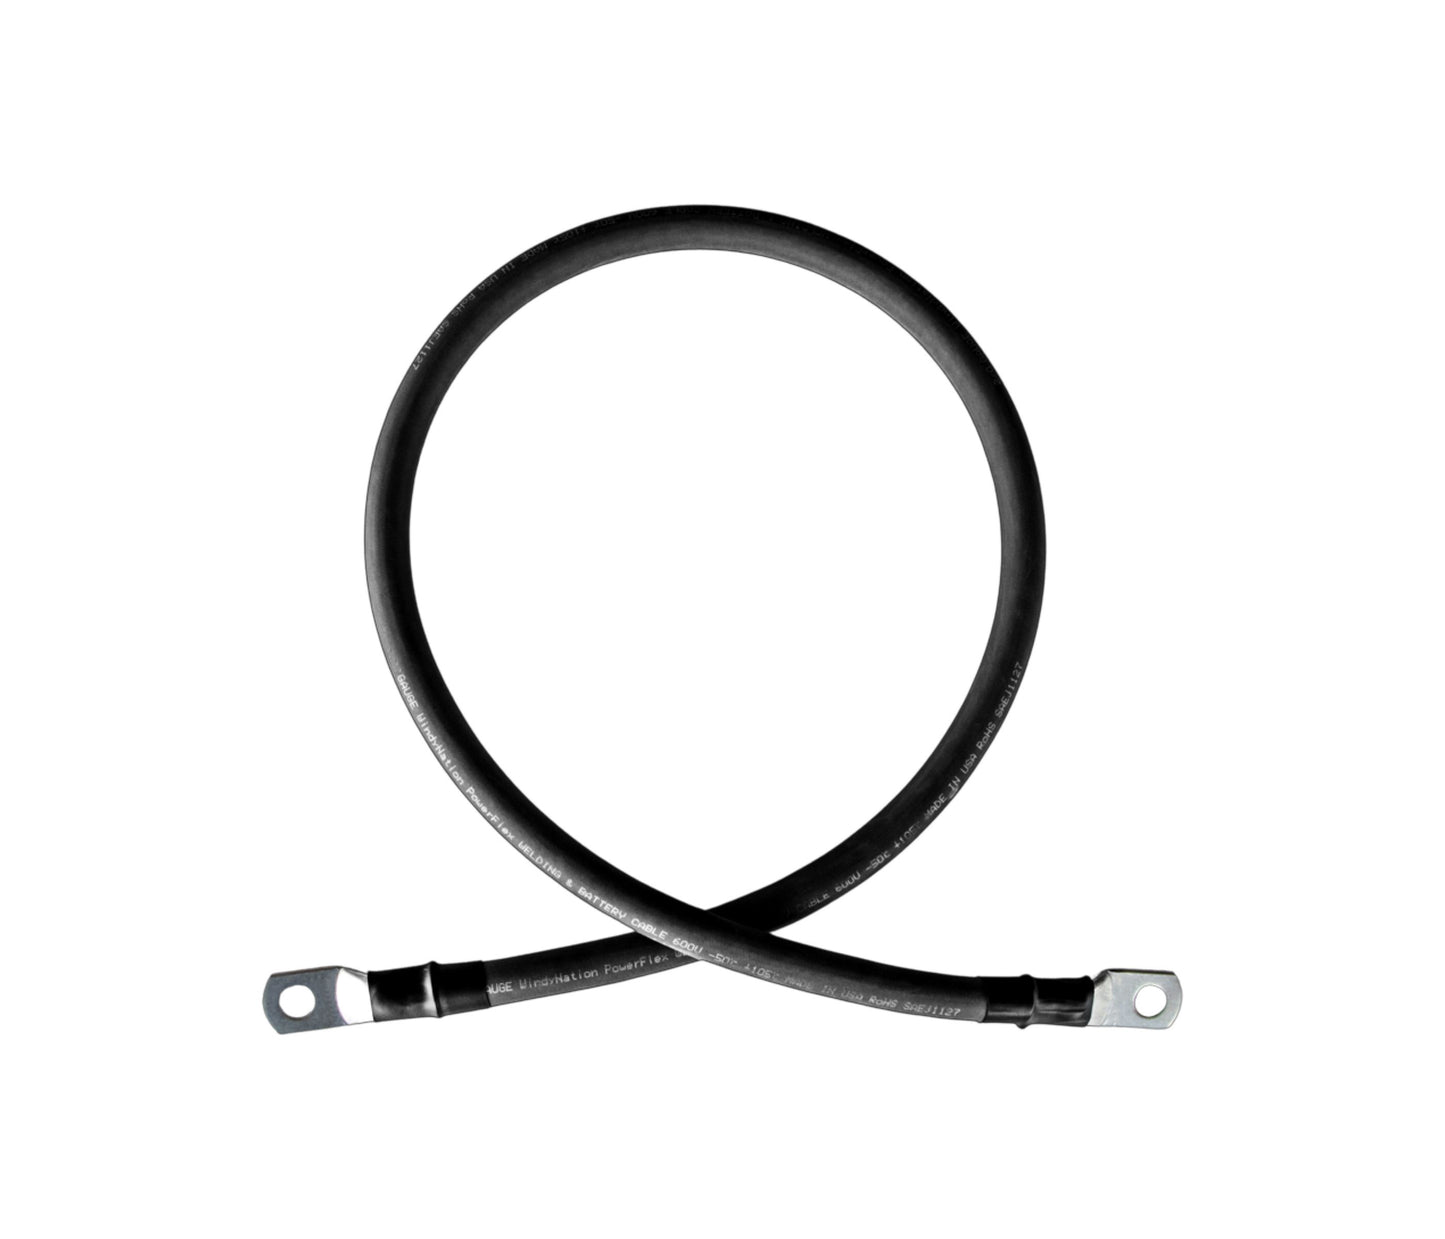 6 Gauge (AWG) Single Black Pure Copper Battery Cable Wire with Lug Connector Ring Terminals